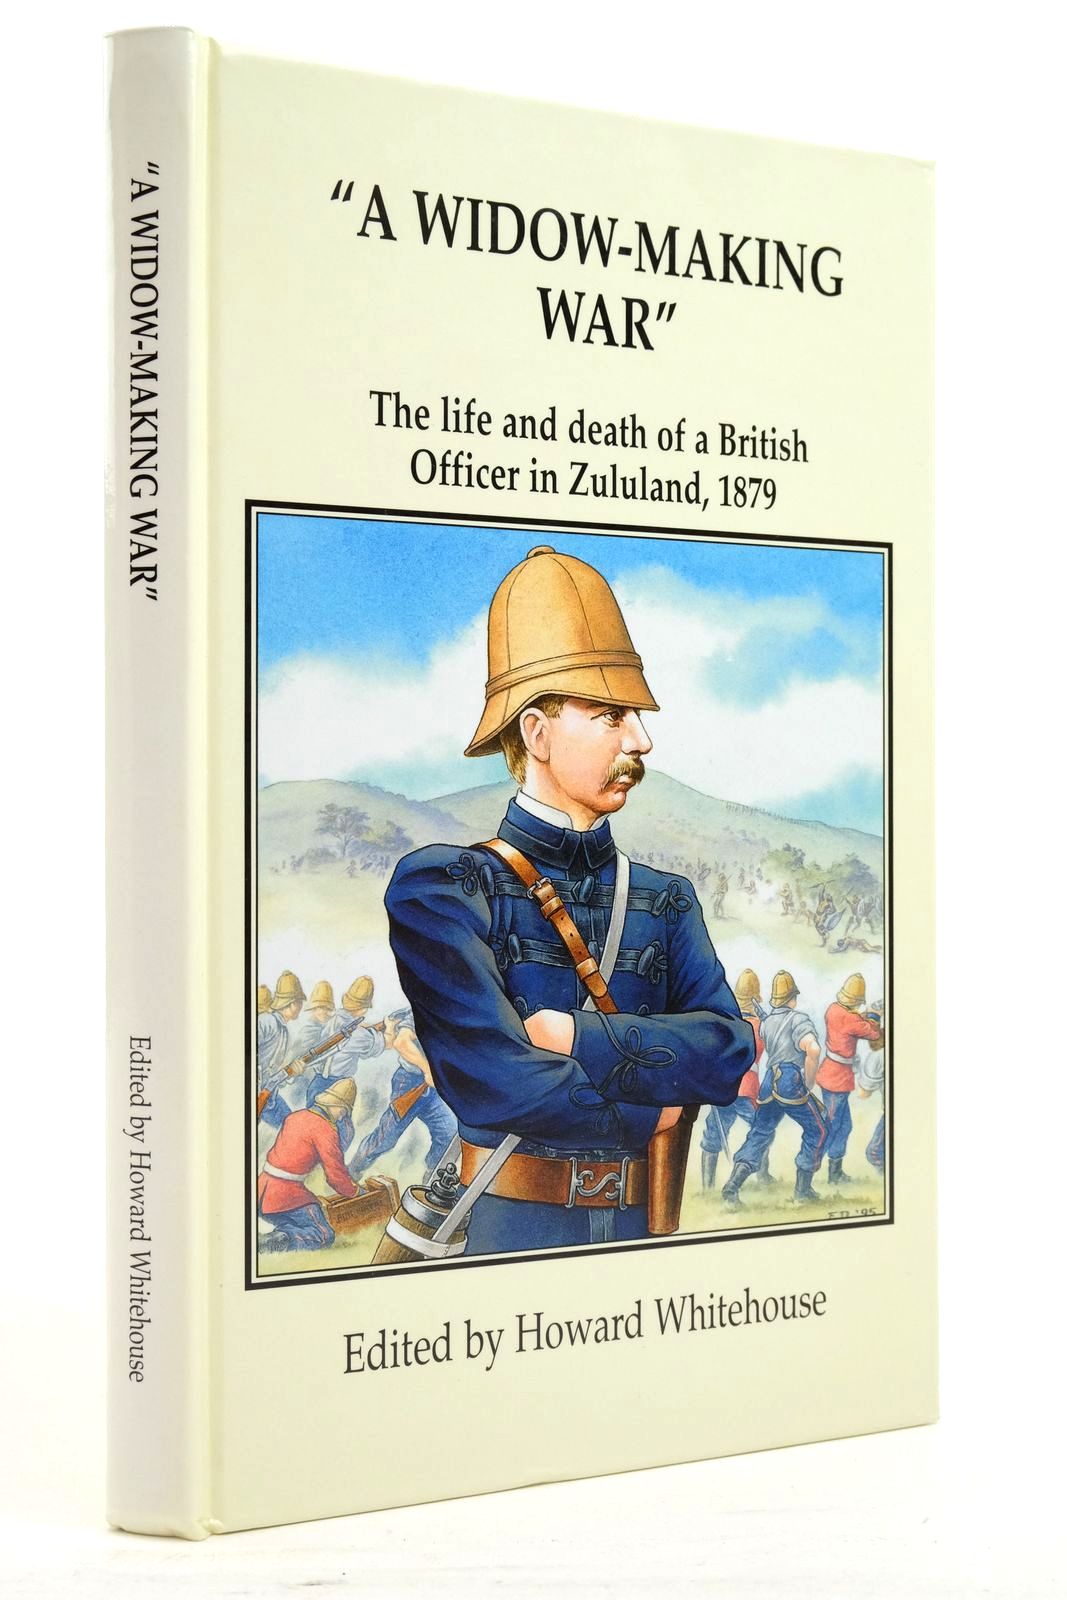 Photo of 'A WIDOW-MAKING WAR' THE LIFE AND DEATH OF A BRITISH OFFICER IN ZULULAND, 1879 written by Whitehouse, Howard published by Paddy Griffith Associates (STOCK CODE: 2138045)  for sale by Stella & Rose's Books